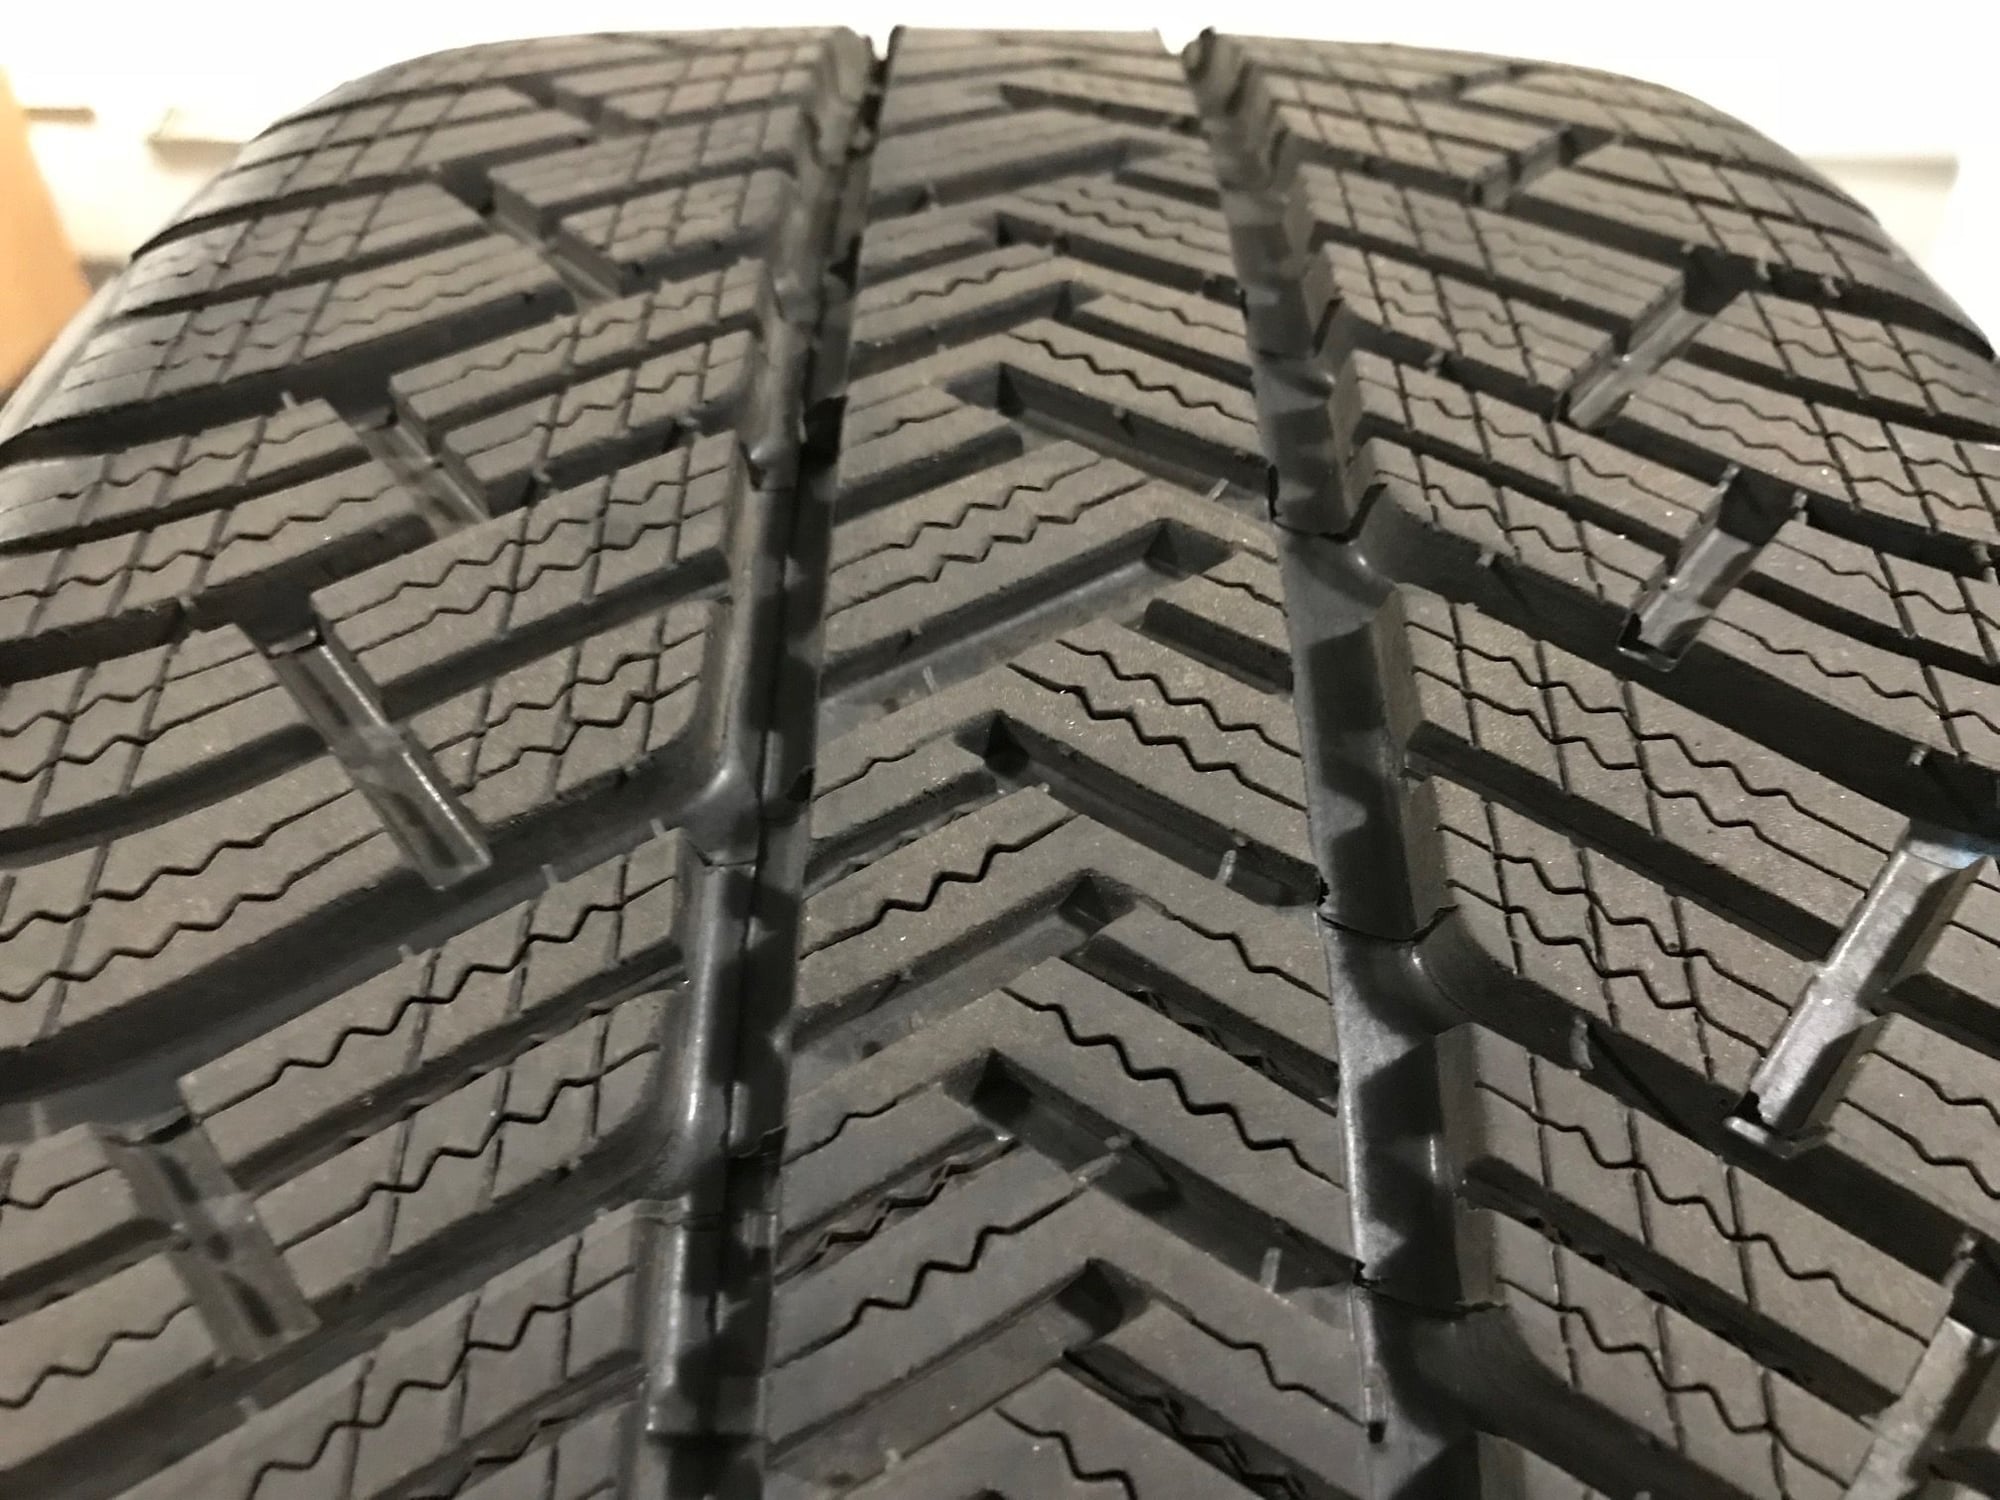 Wheels and Tires/Axles - Michelin Alpin PA4 Winter Tires for 991 - Used - 2014 to 2019 Porsche GT3 - 2012 to 2019 Porsche 911 - Summit, NJ 07901, United States